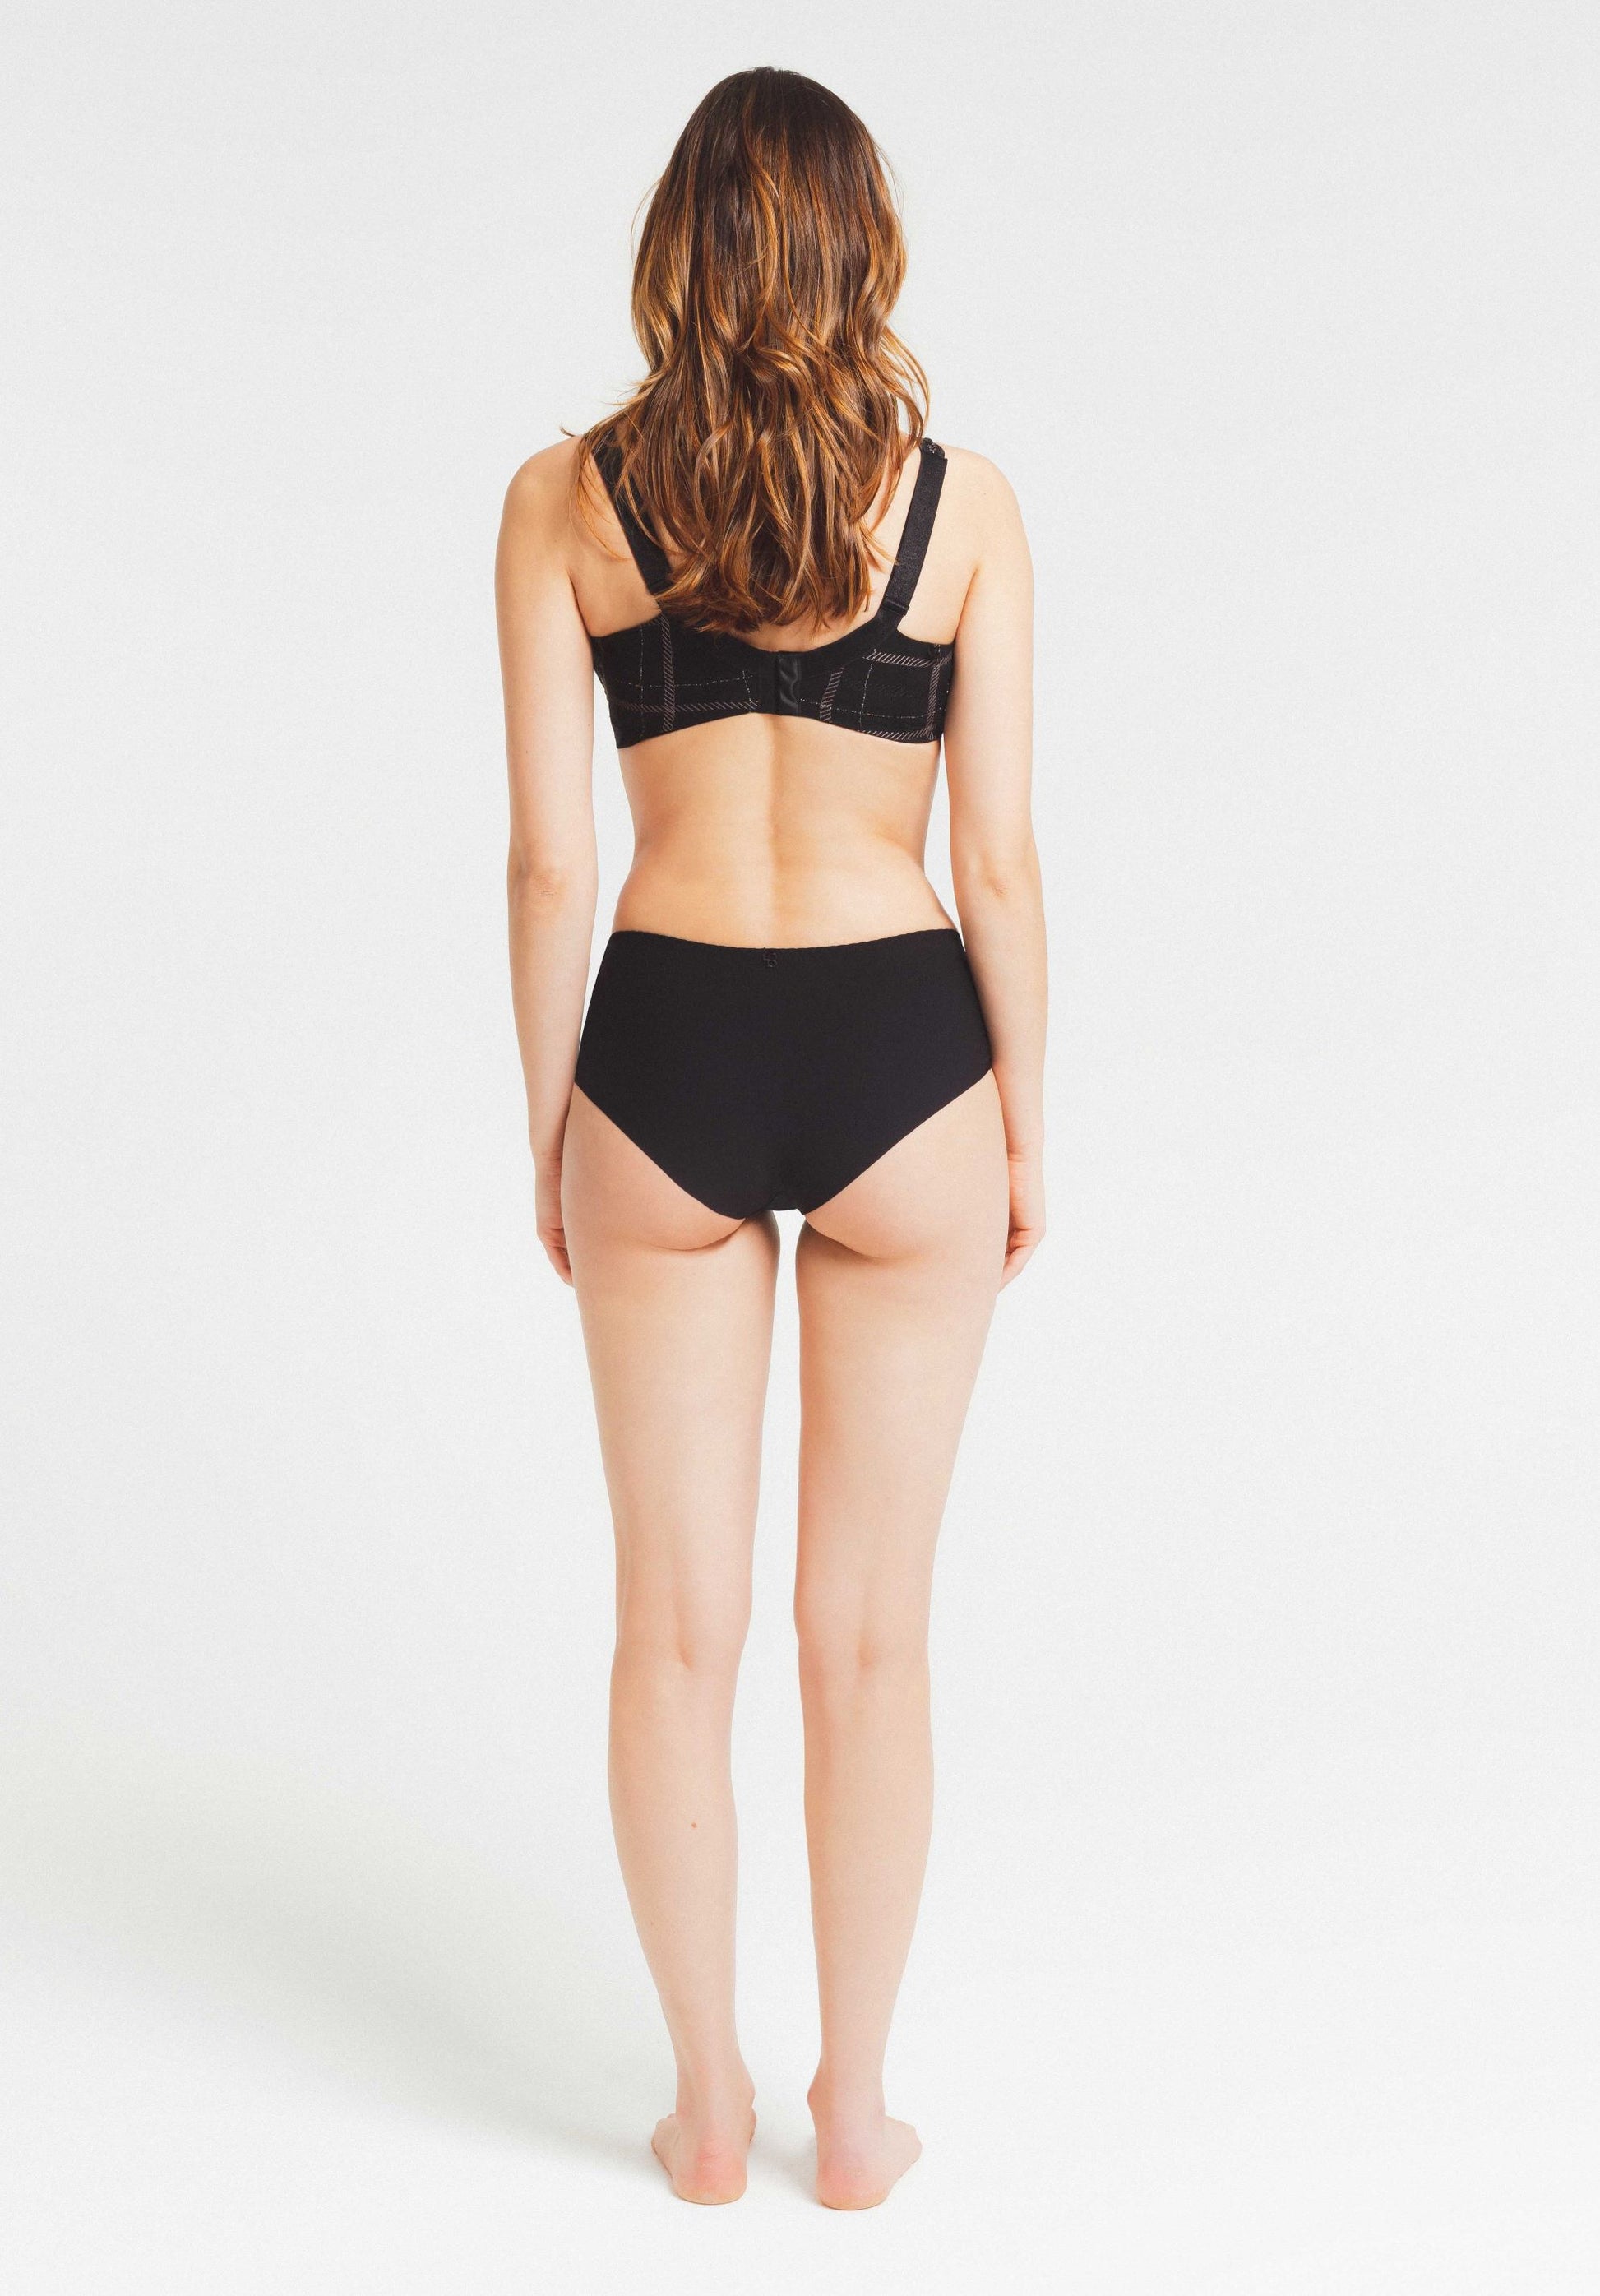 The Louisa Bracq non-wired spacer bra and full brief from the Albanach line at Di Moda Lingerie Toronto